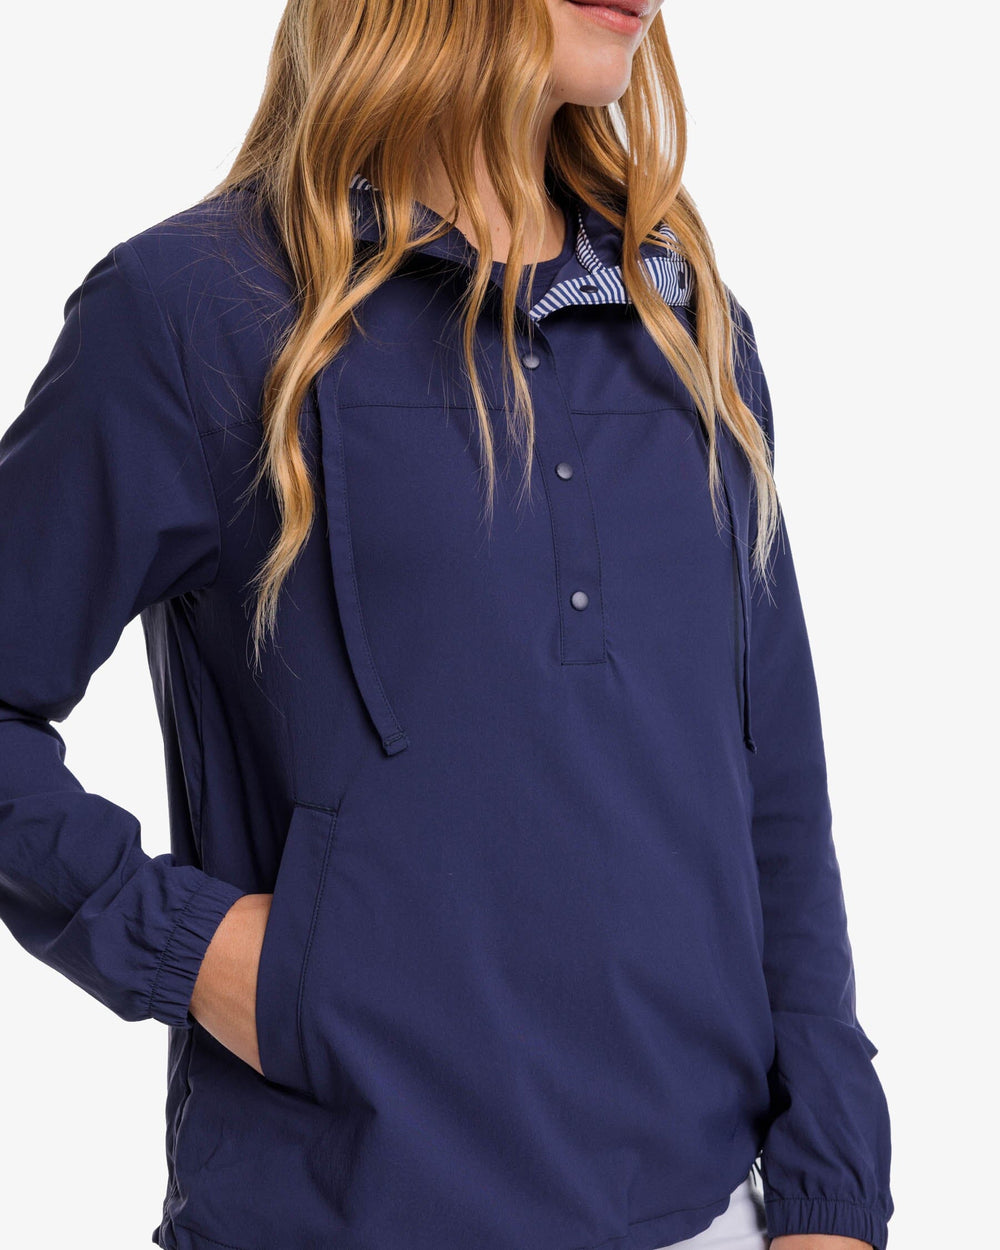 The detail view of the Southern Tide Calie Pop Placket Popover by Southern Tide - Nautical Navy